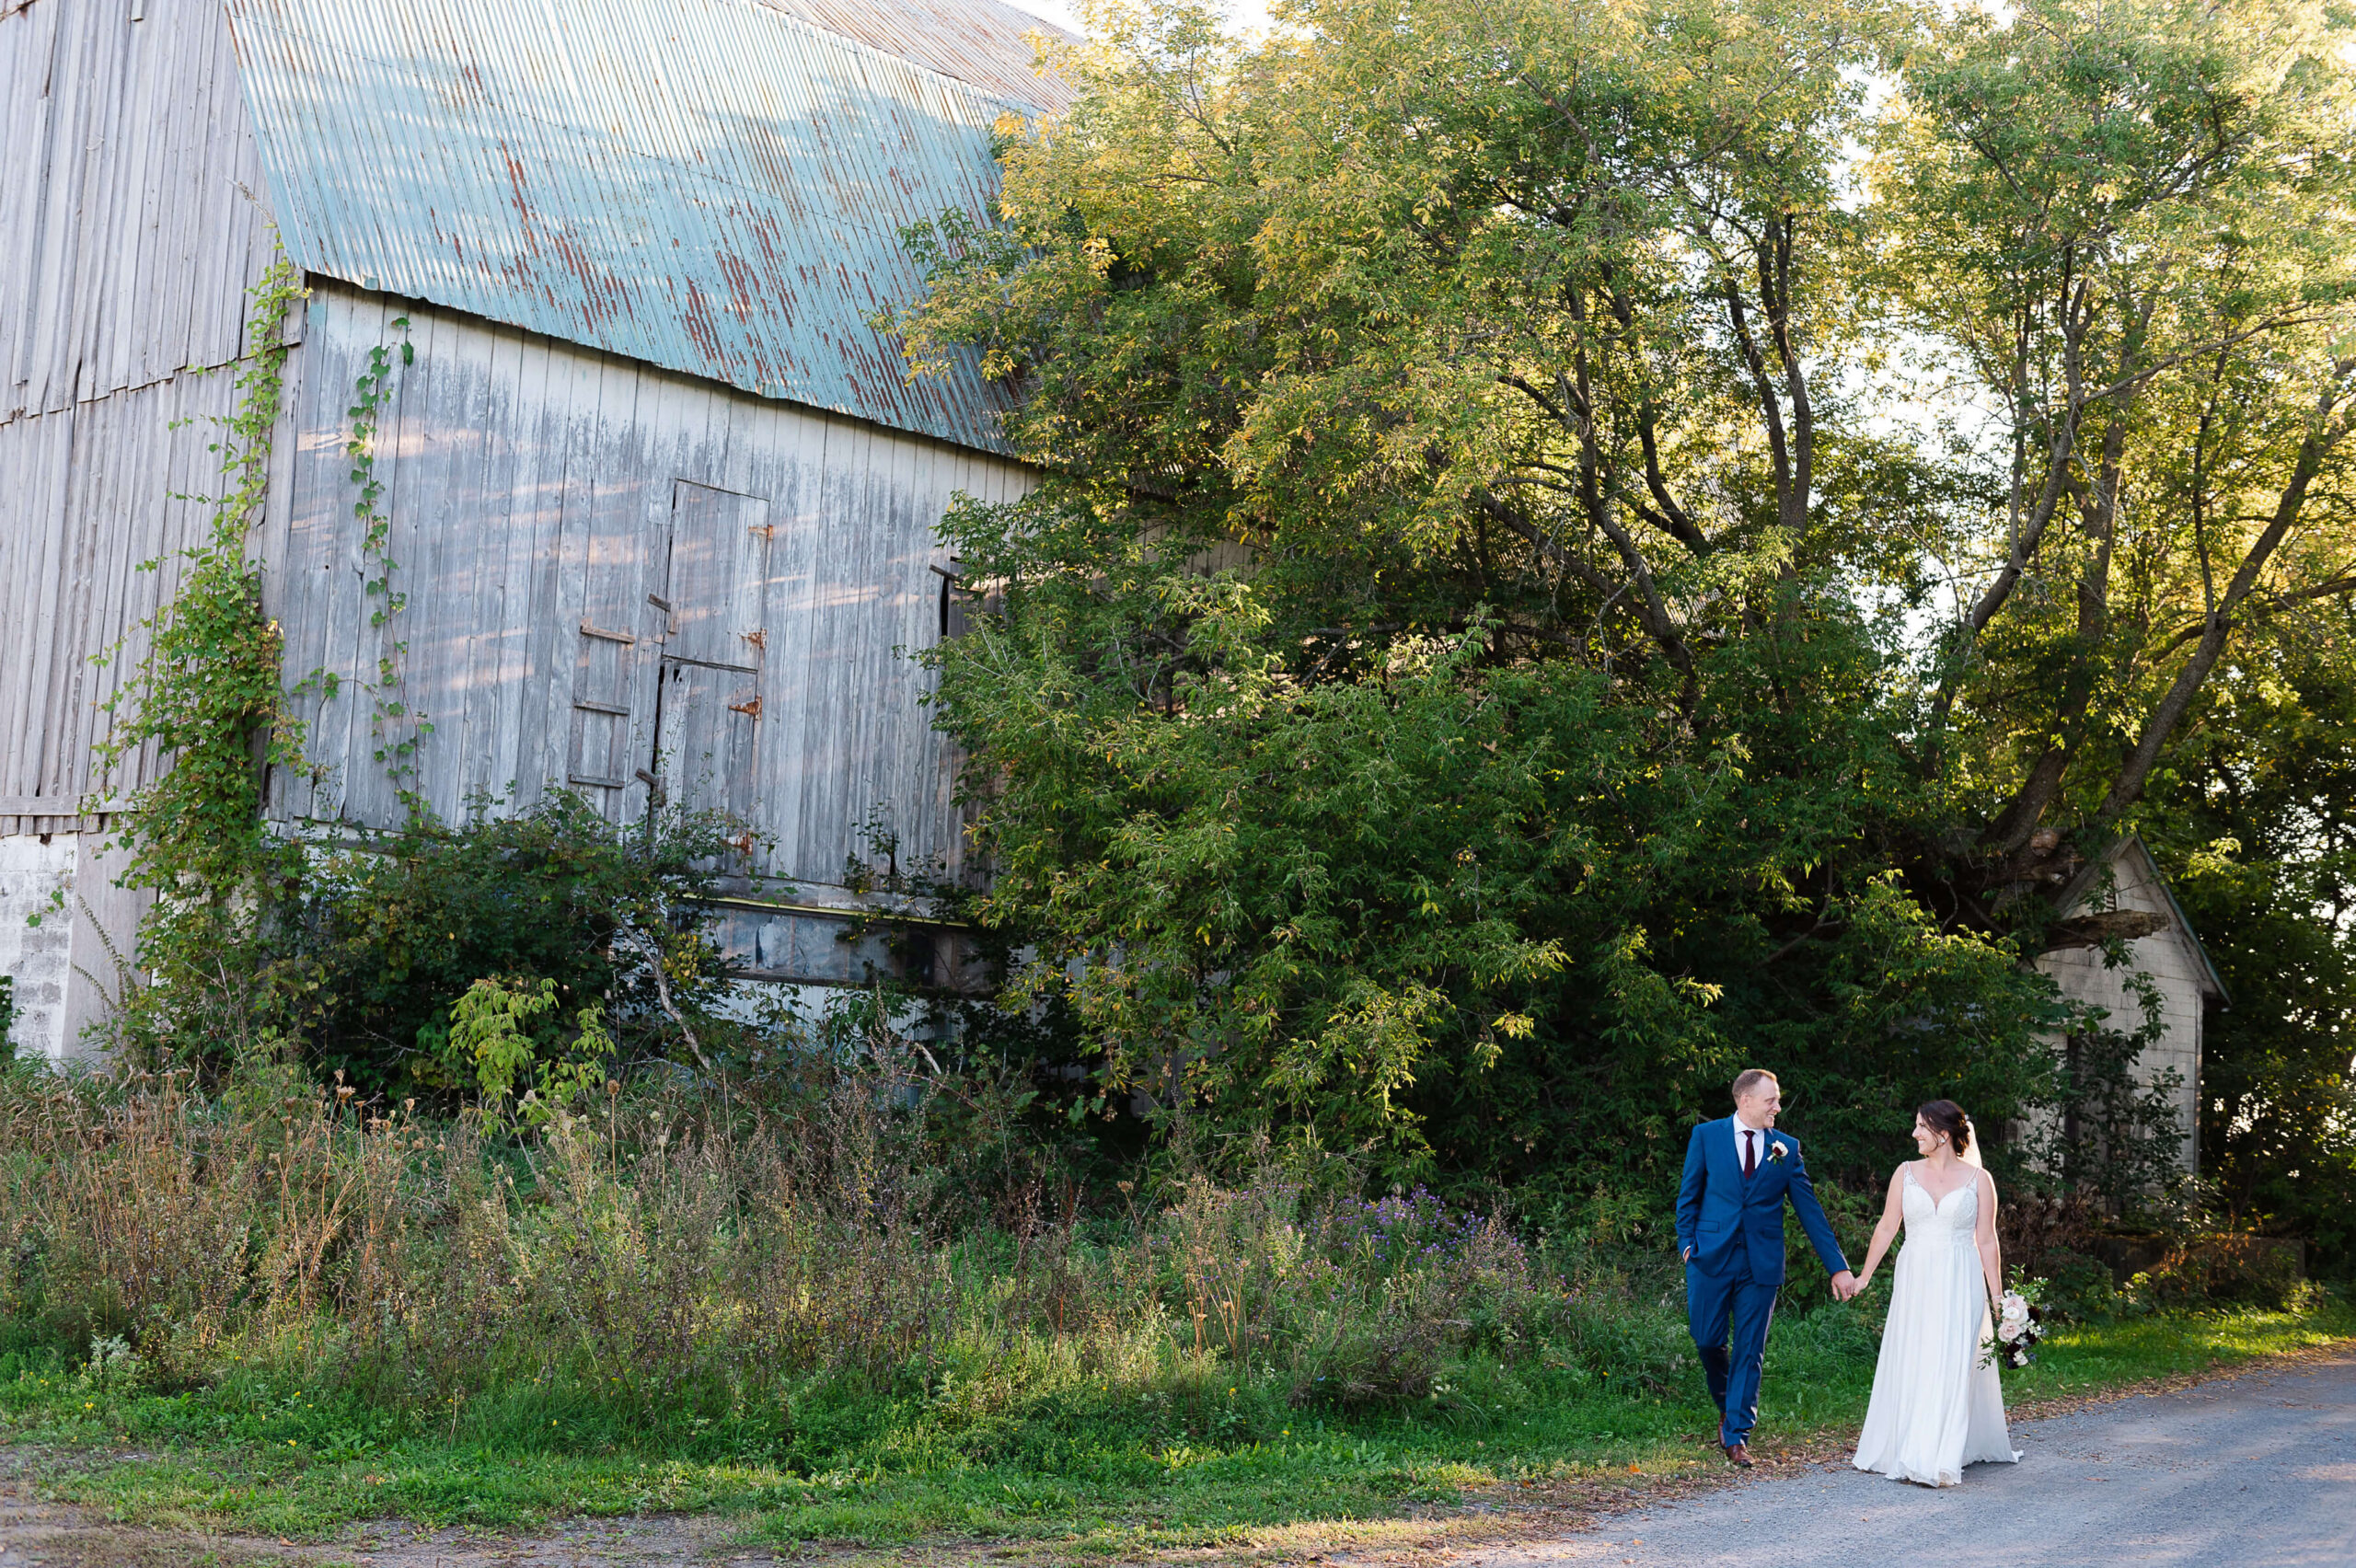 a bride and groom walk hand in hand by the barn wedding venue organized by Opportunity Knocks Events